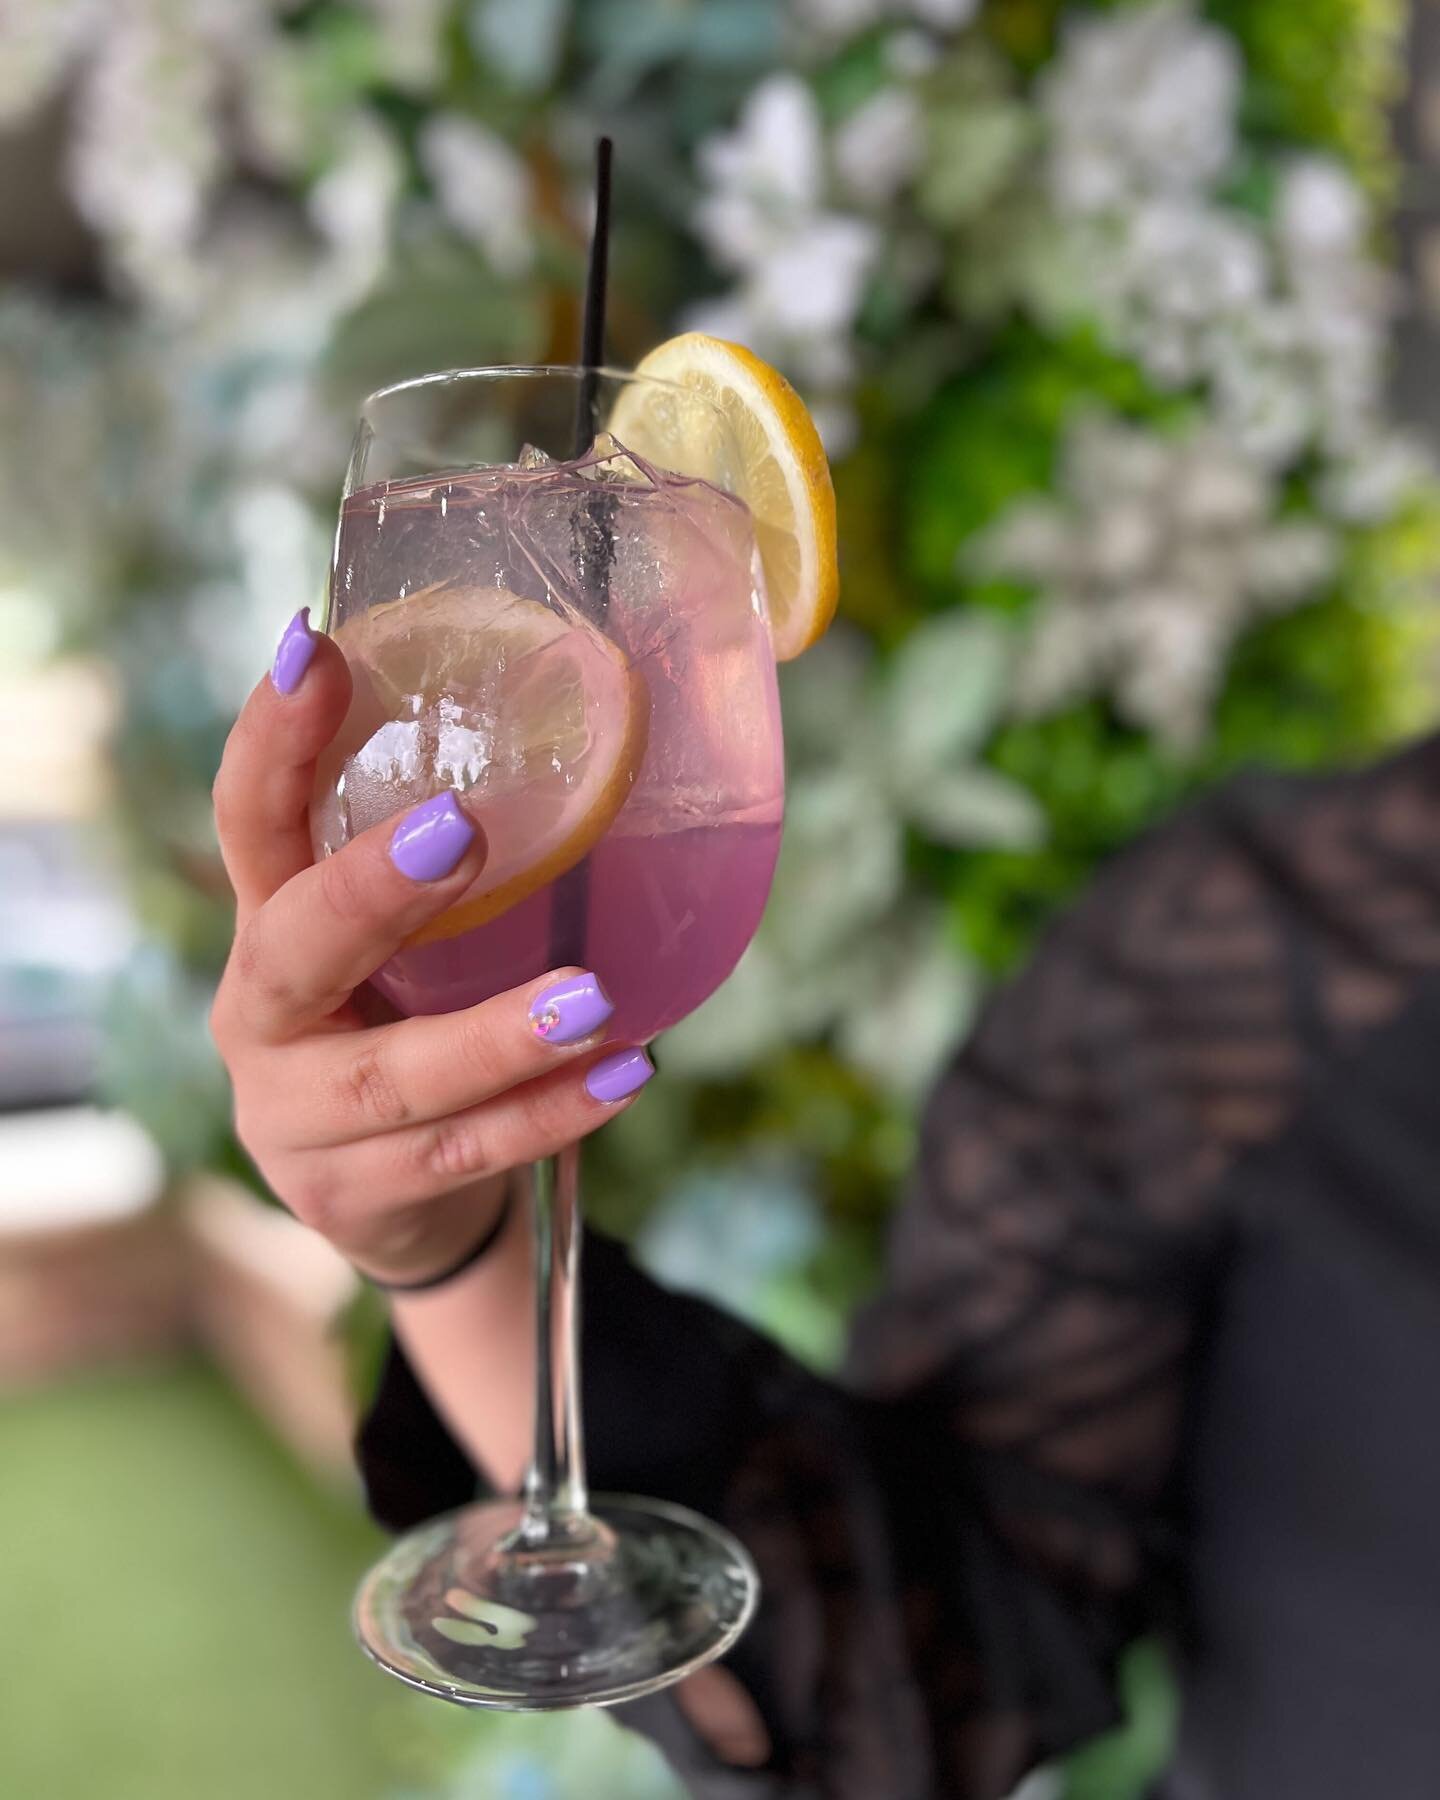 ☀️🍹 Dive into Summer with Our Refreshing New Cocktail Lavish lavender spritz 🍹☀️

Summer is almost here, and we're thrilled to introduce our brand new signature cocktail that will transport your taste buds to paradise! 🌴🍹 Get ready to sip on pure